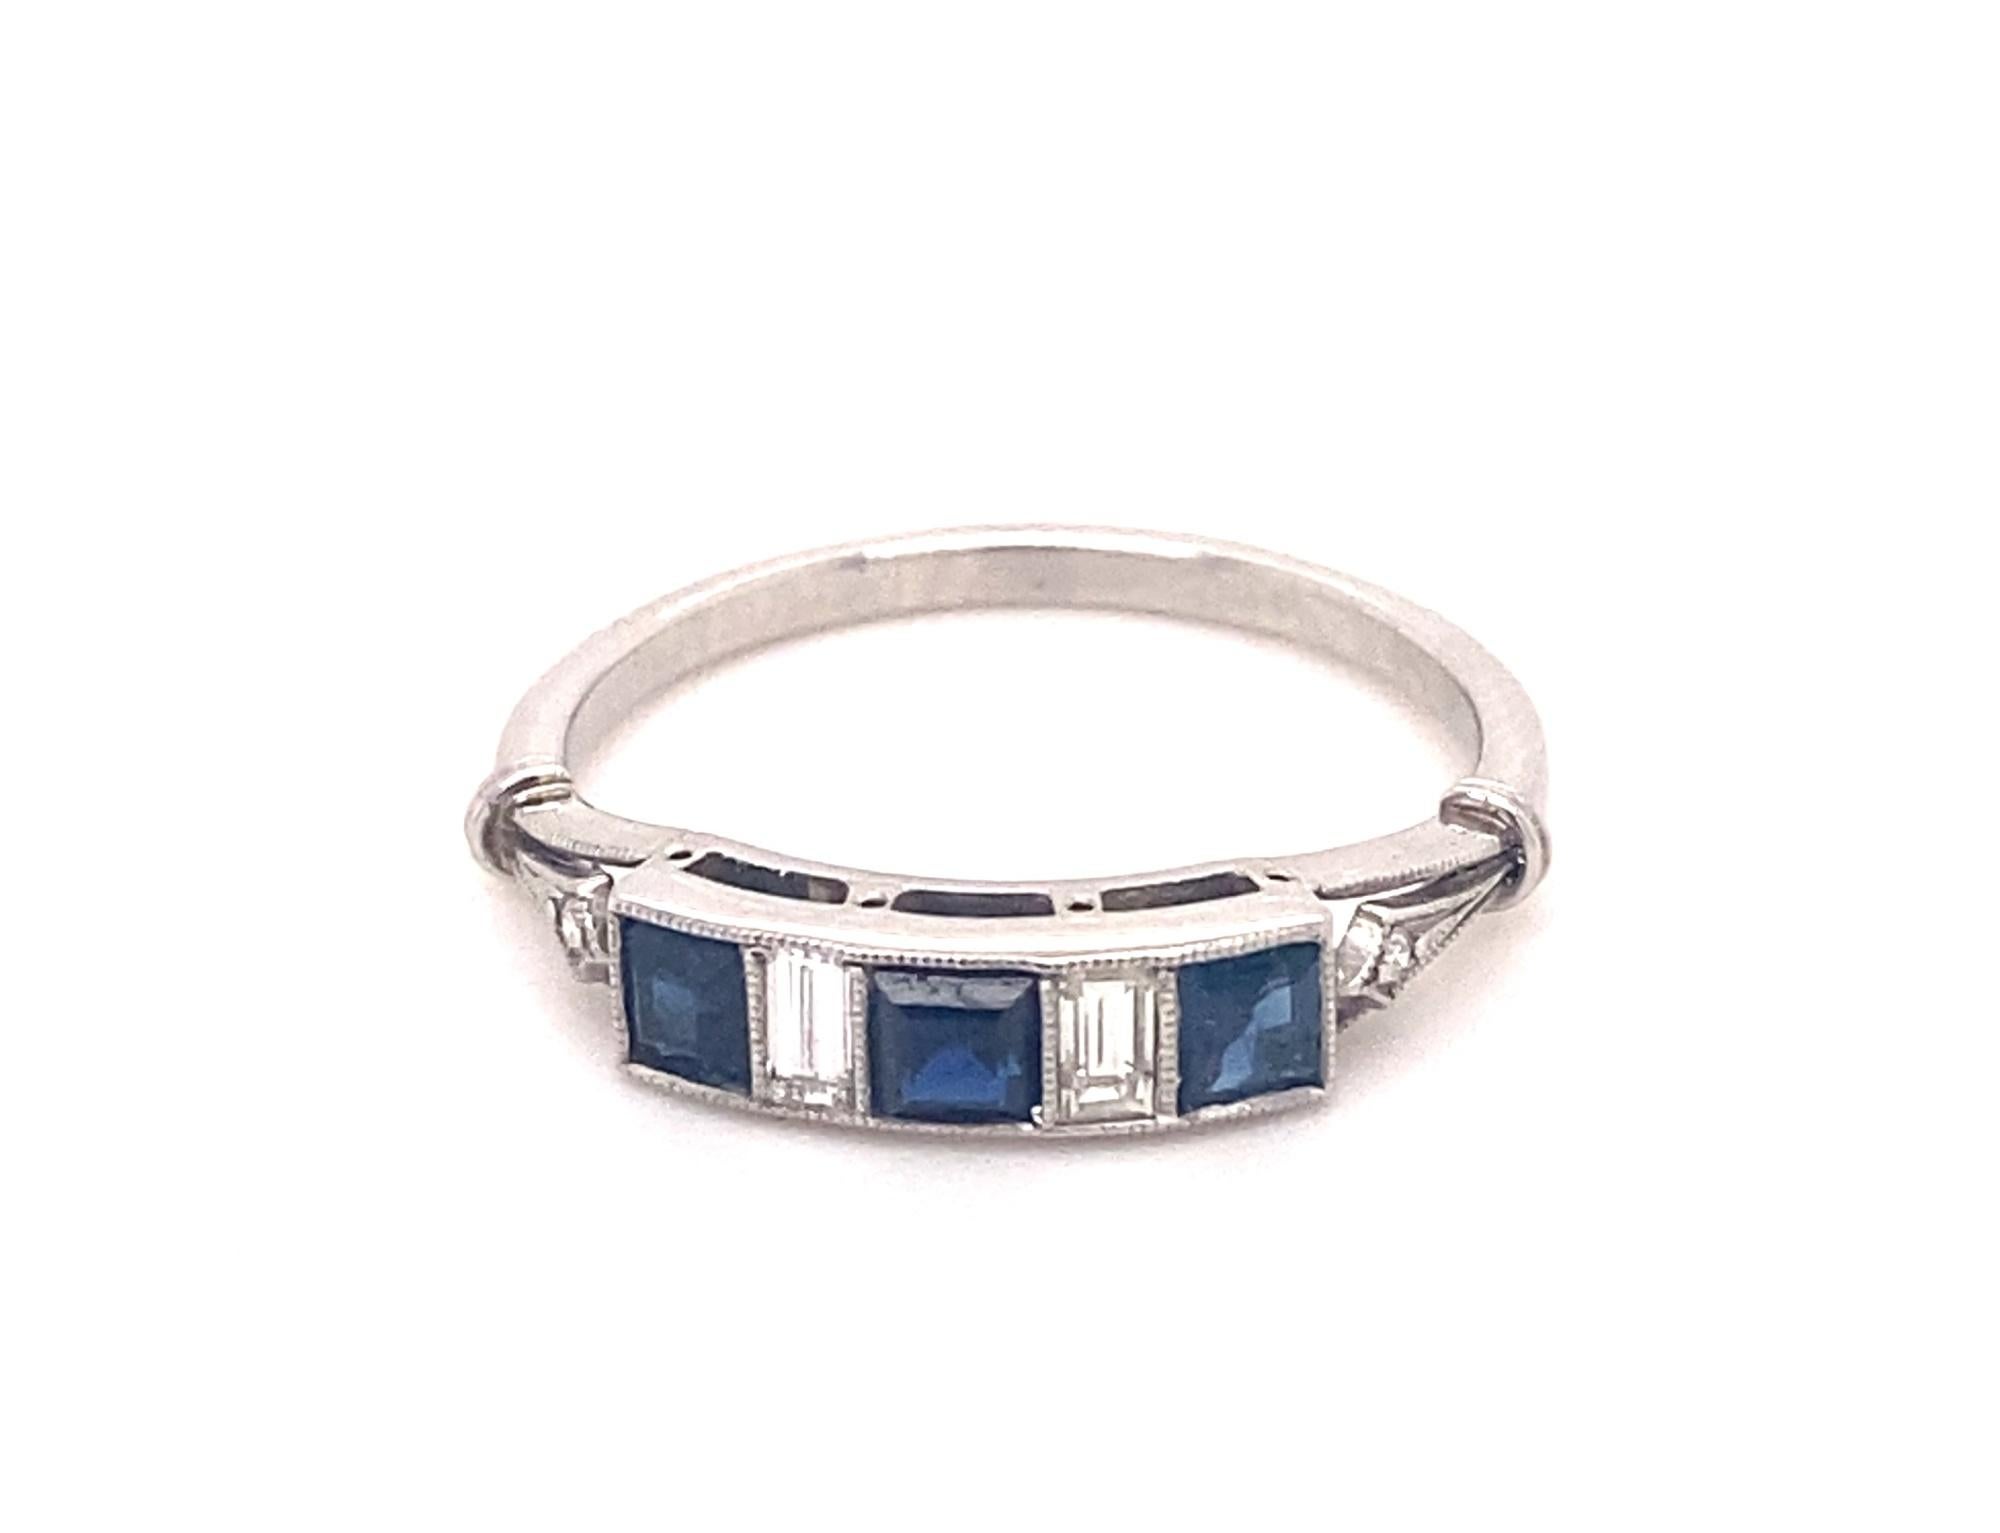 This is a stunning vintage ring set with 3 emerald Cut Sapphires and 2 French cut diamonds in platinum.  The sapphires are natural blue gem quality nice deep blue color and good clarity.  The diamonds average H color VS-2 clarity, total gem weight